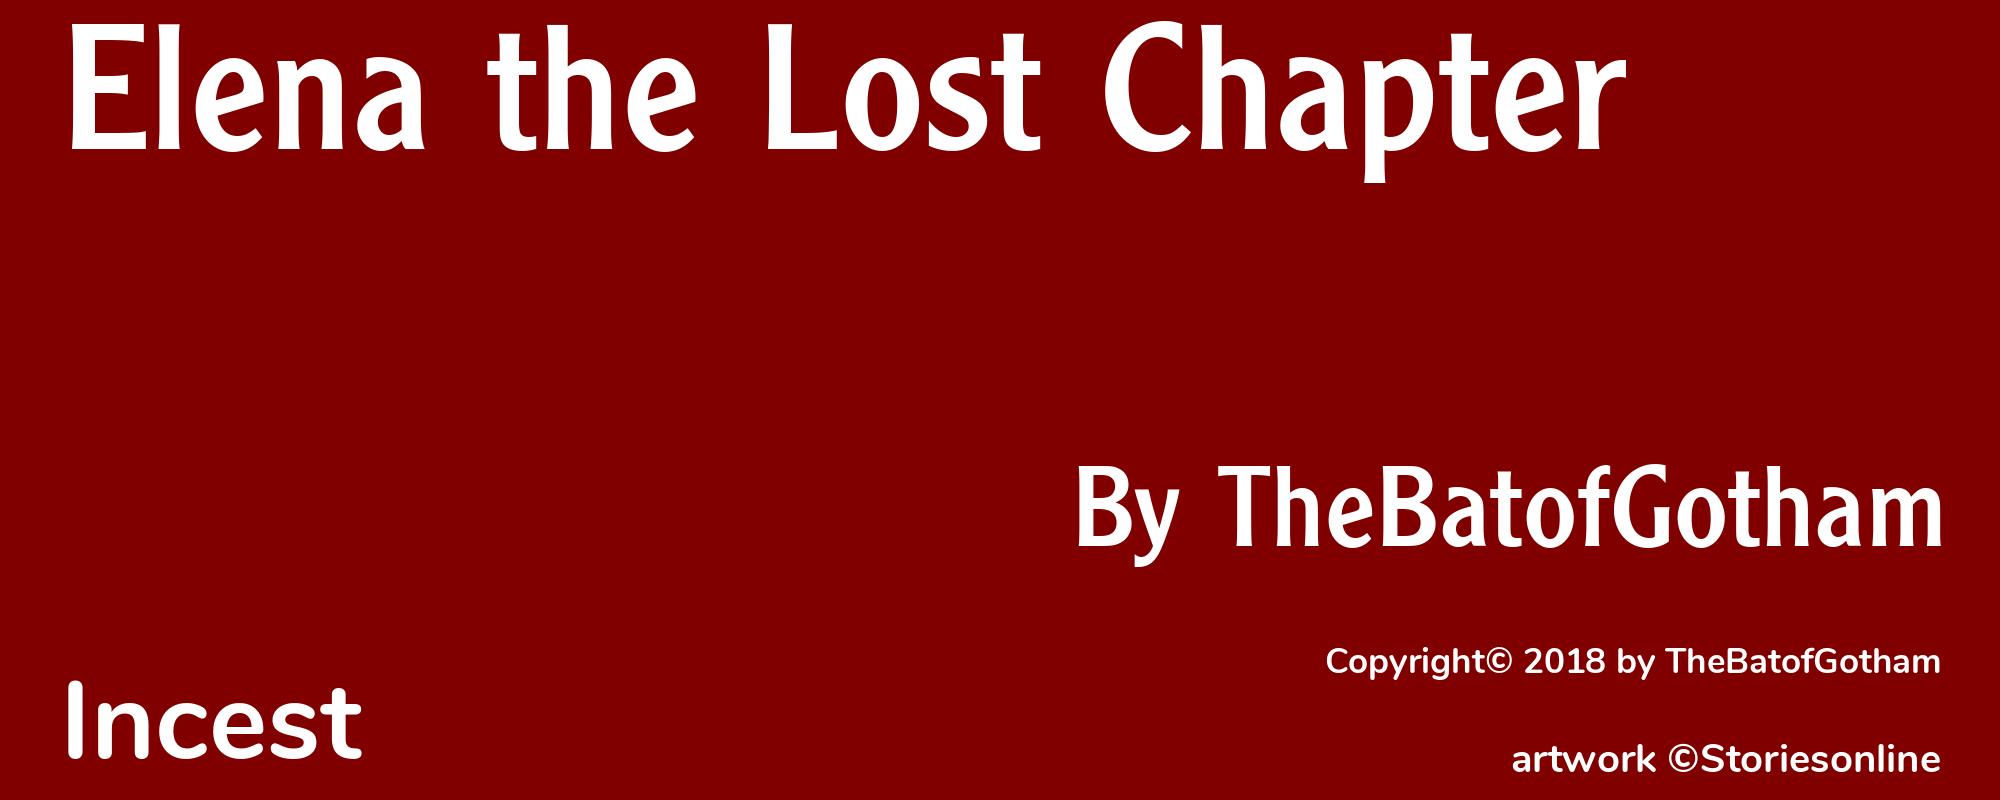 Elena the Lost Chapter - Cover